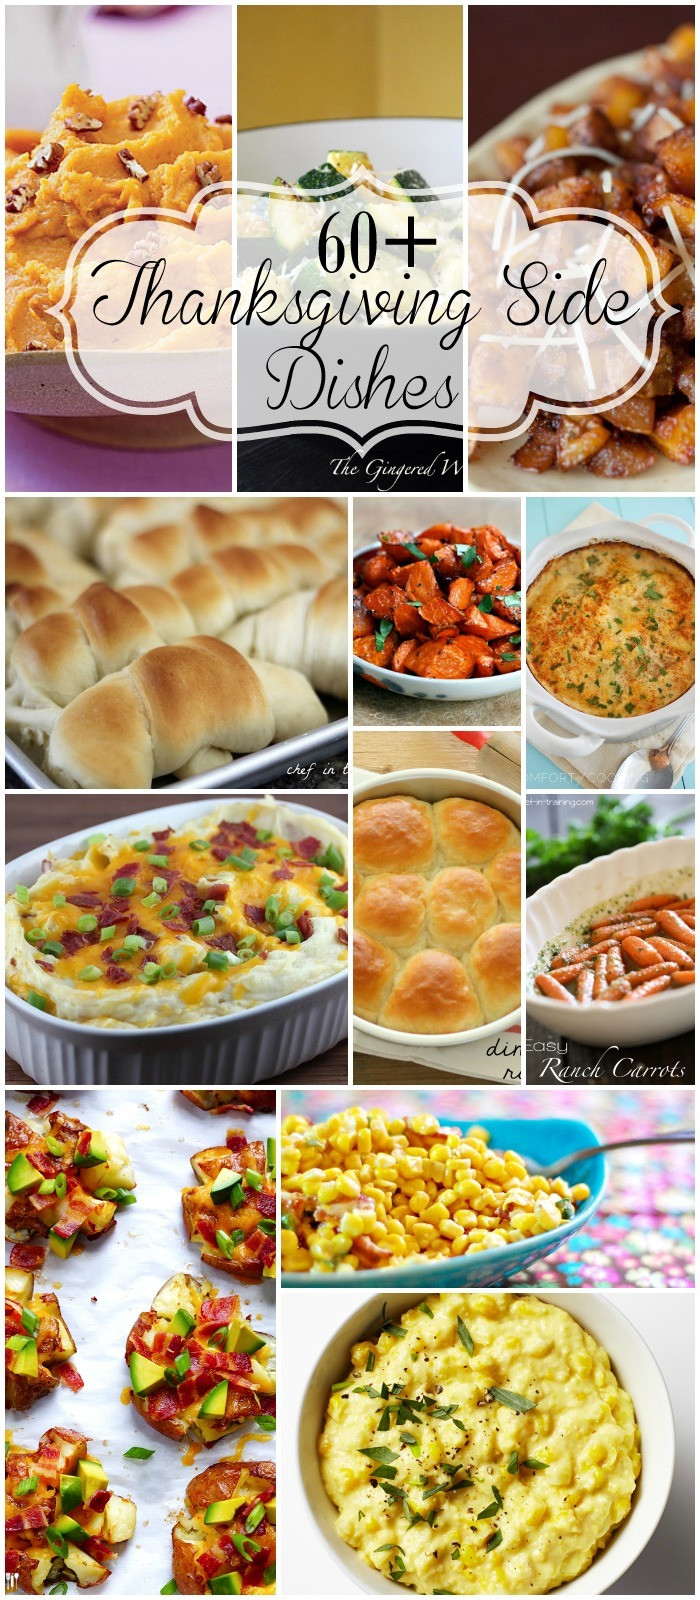 Easy Side Dishes For Thanksgiving Dinner
 60 Thanksgiving Sides Recipes